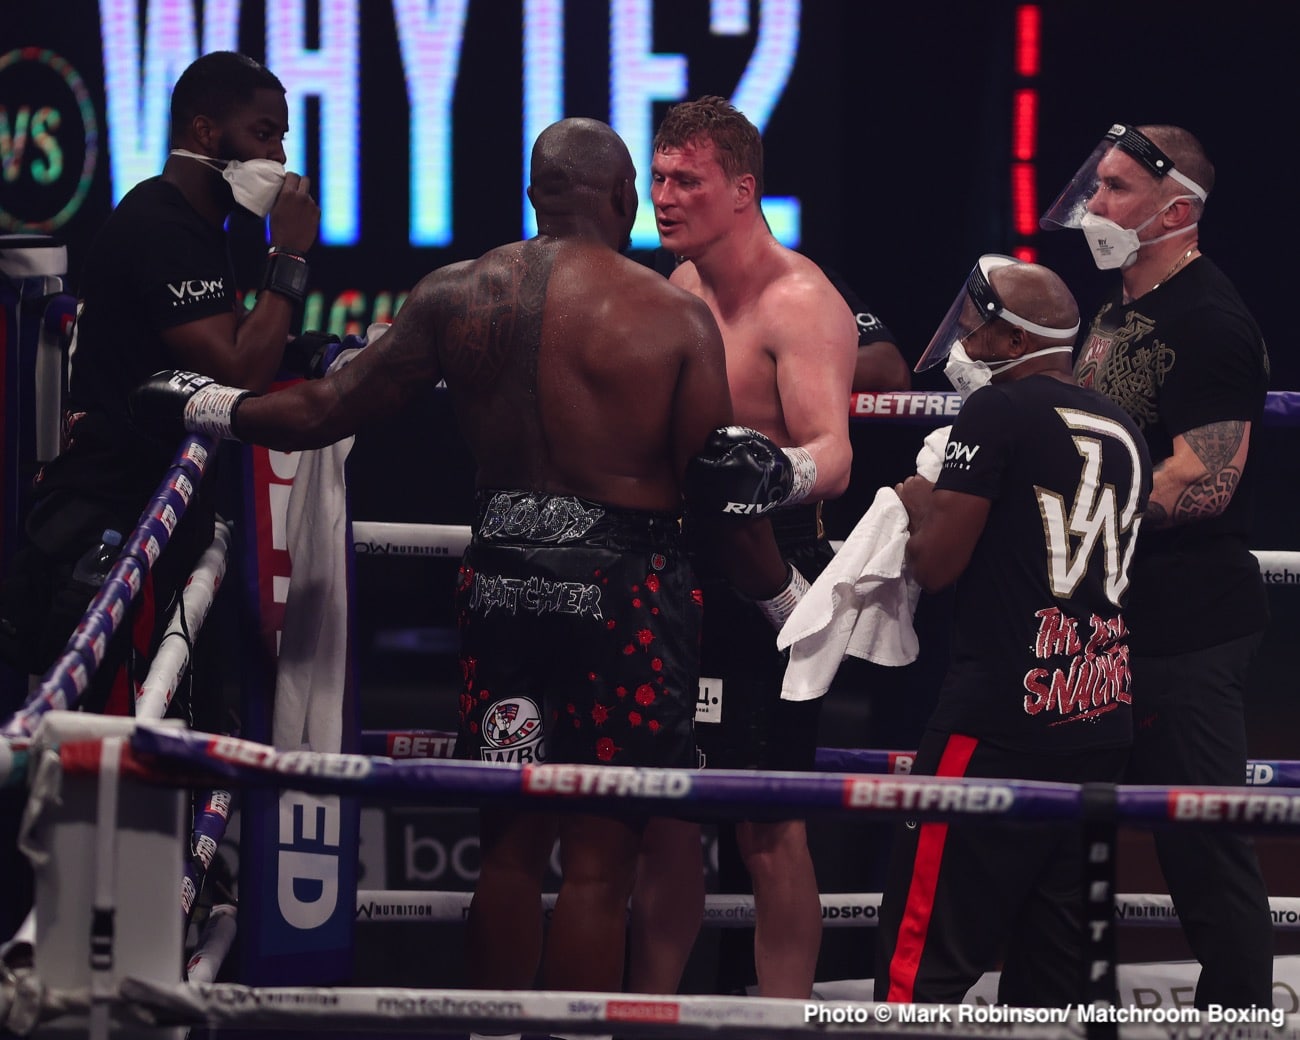 Image: Dillian Whyte shows respect to Alexander Povetkin after his retirement